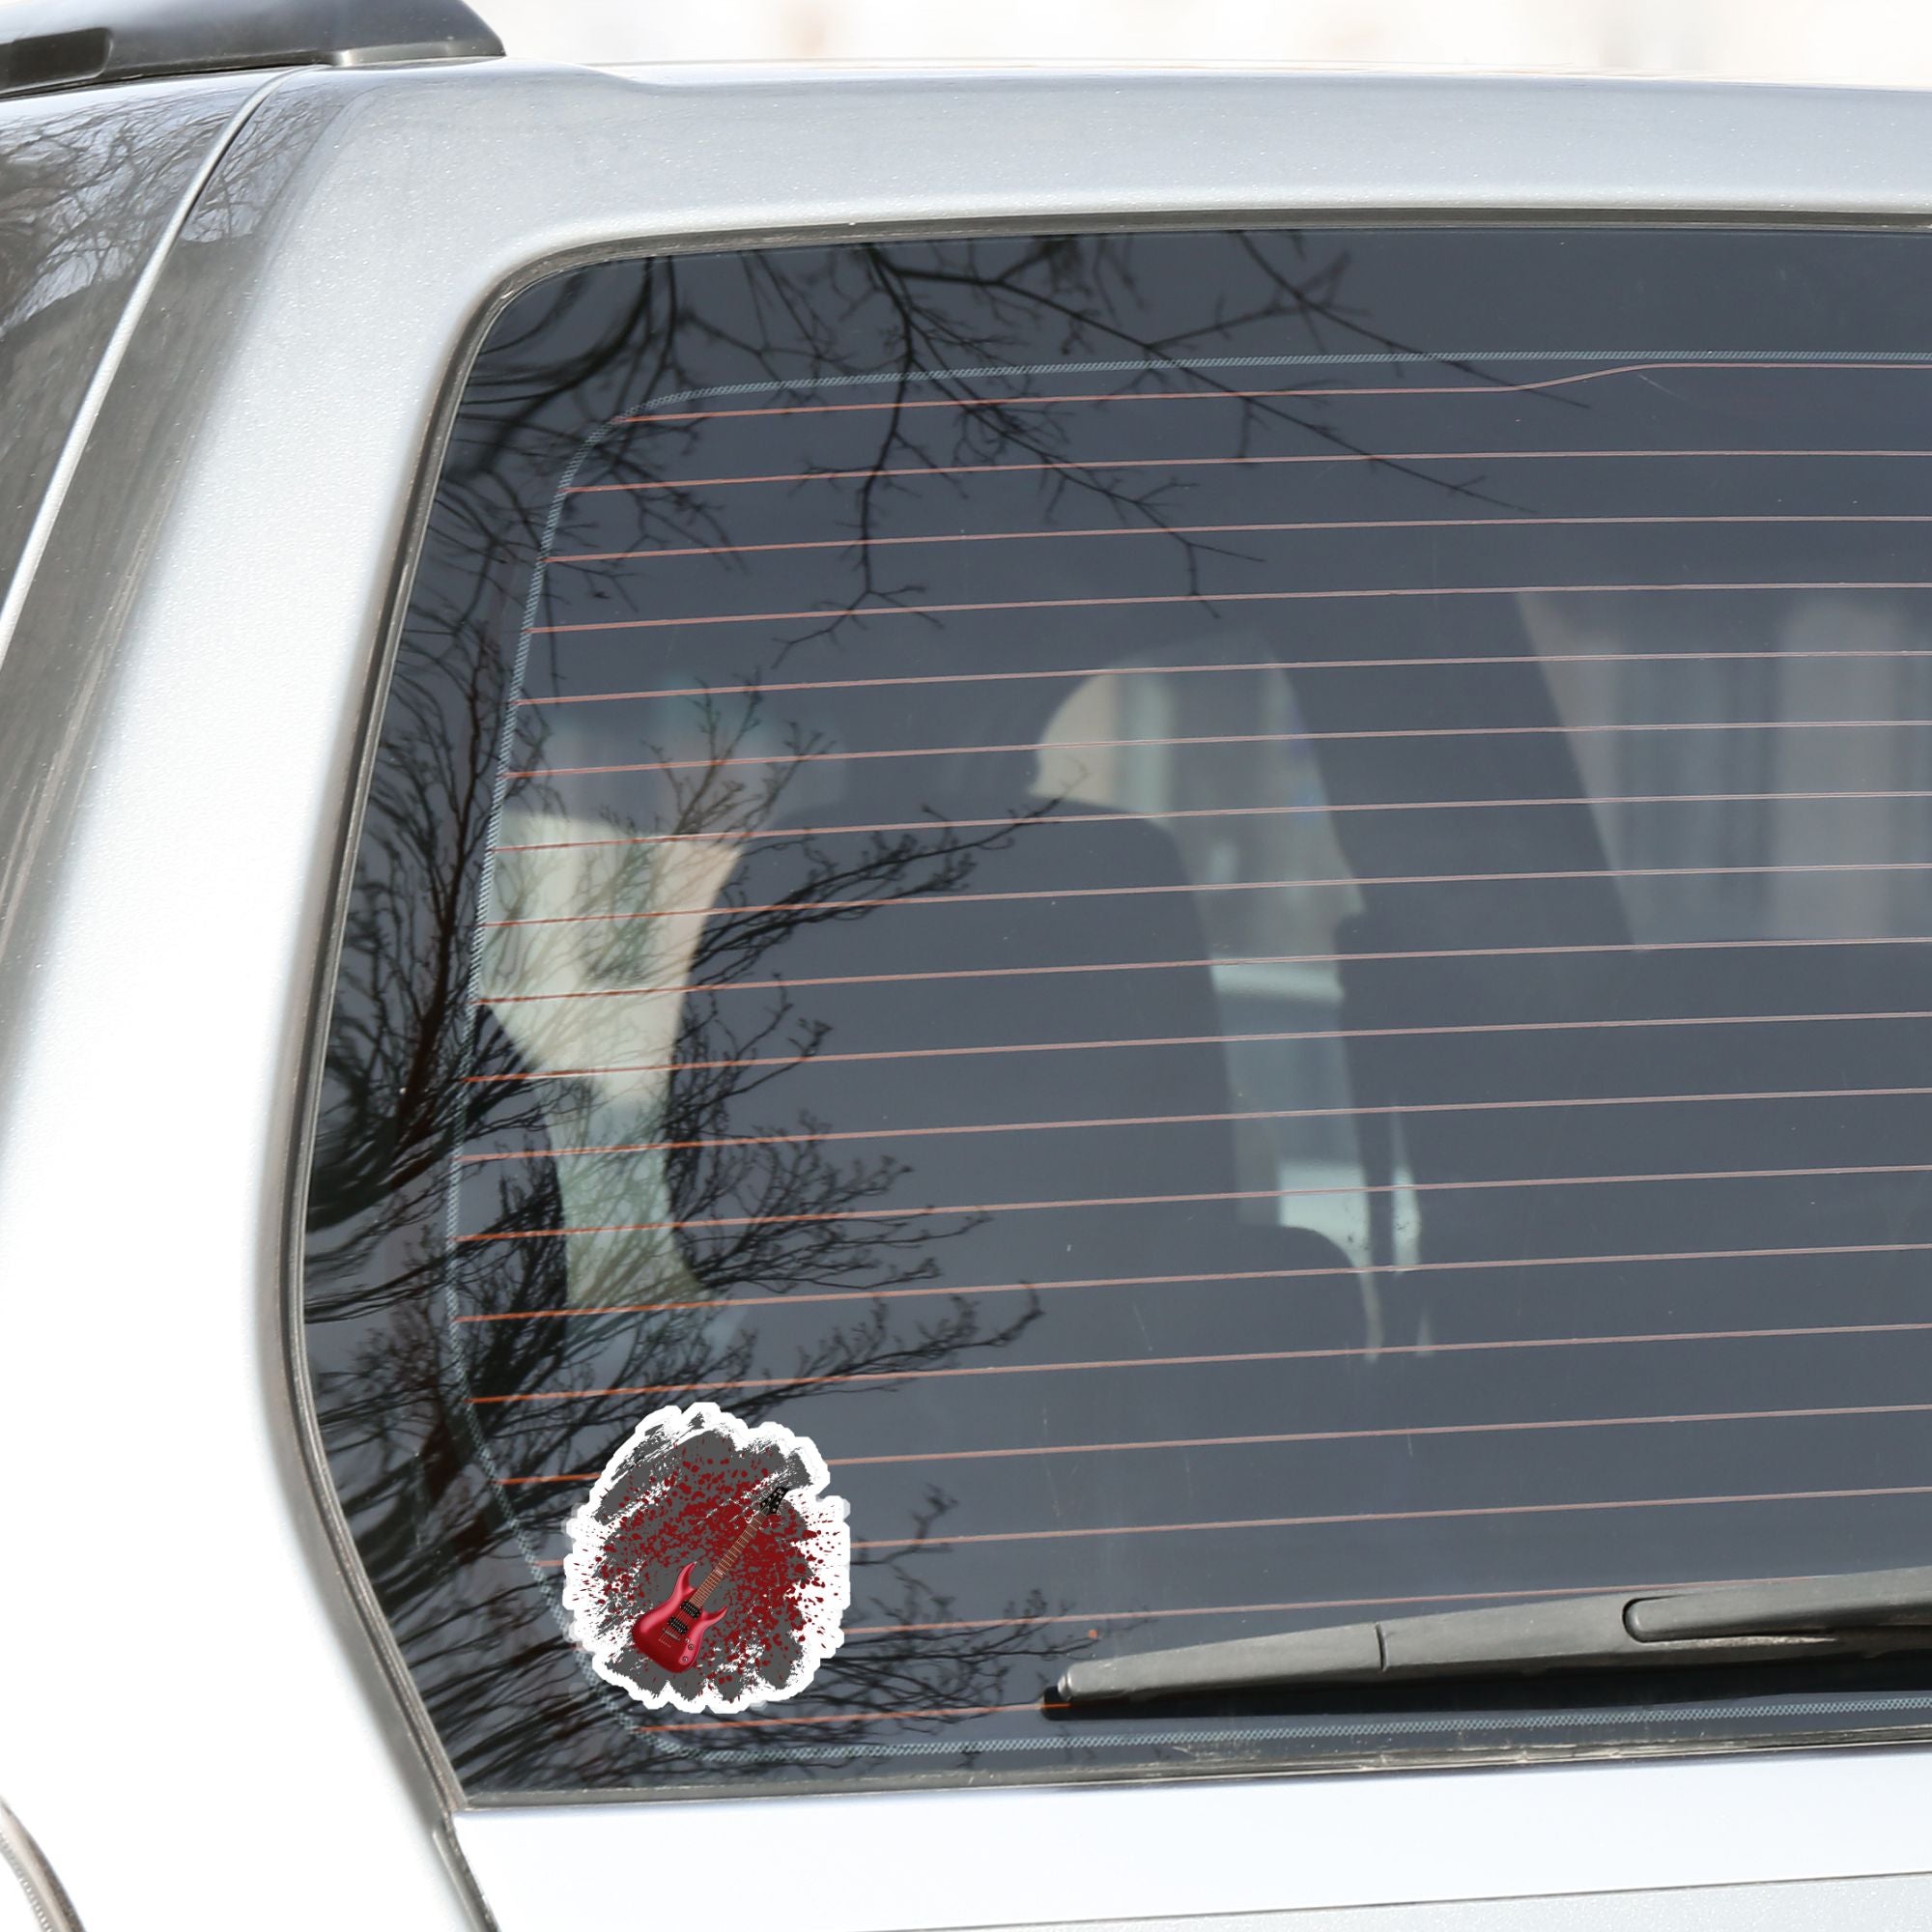 This guitar sticker is great for any guitarist, whether a beginner or a seasoned shredder! This individual die-cut sticker features a burgundy electric guitar on a gray and burgundy paint splattered background. Turn it up!  This image shows the guitar die-cut sticker on the back window of a car.